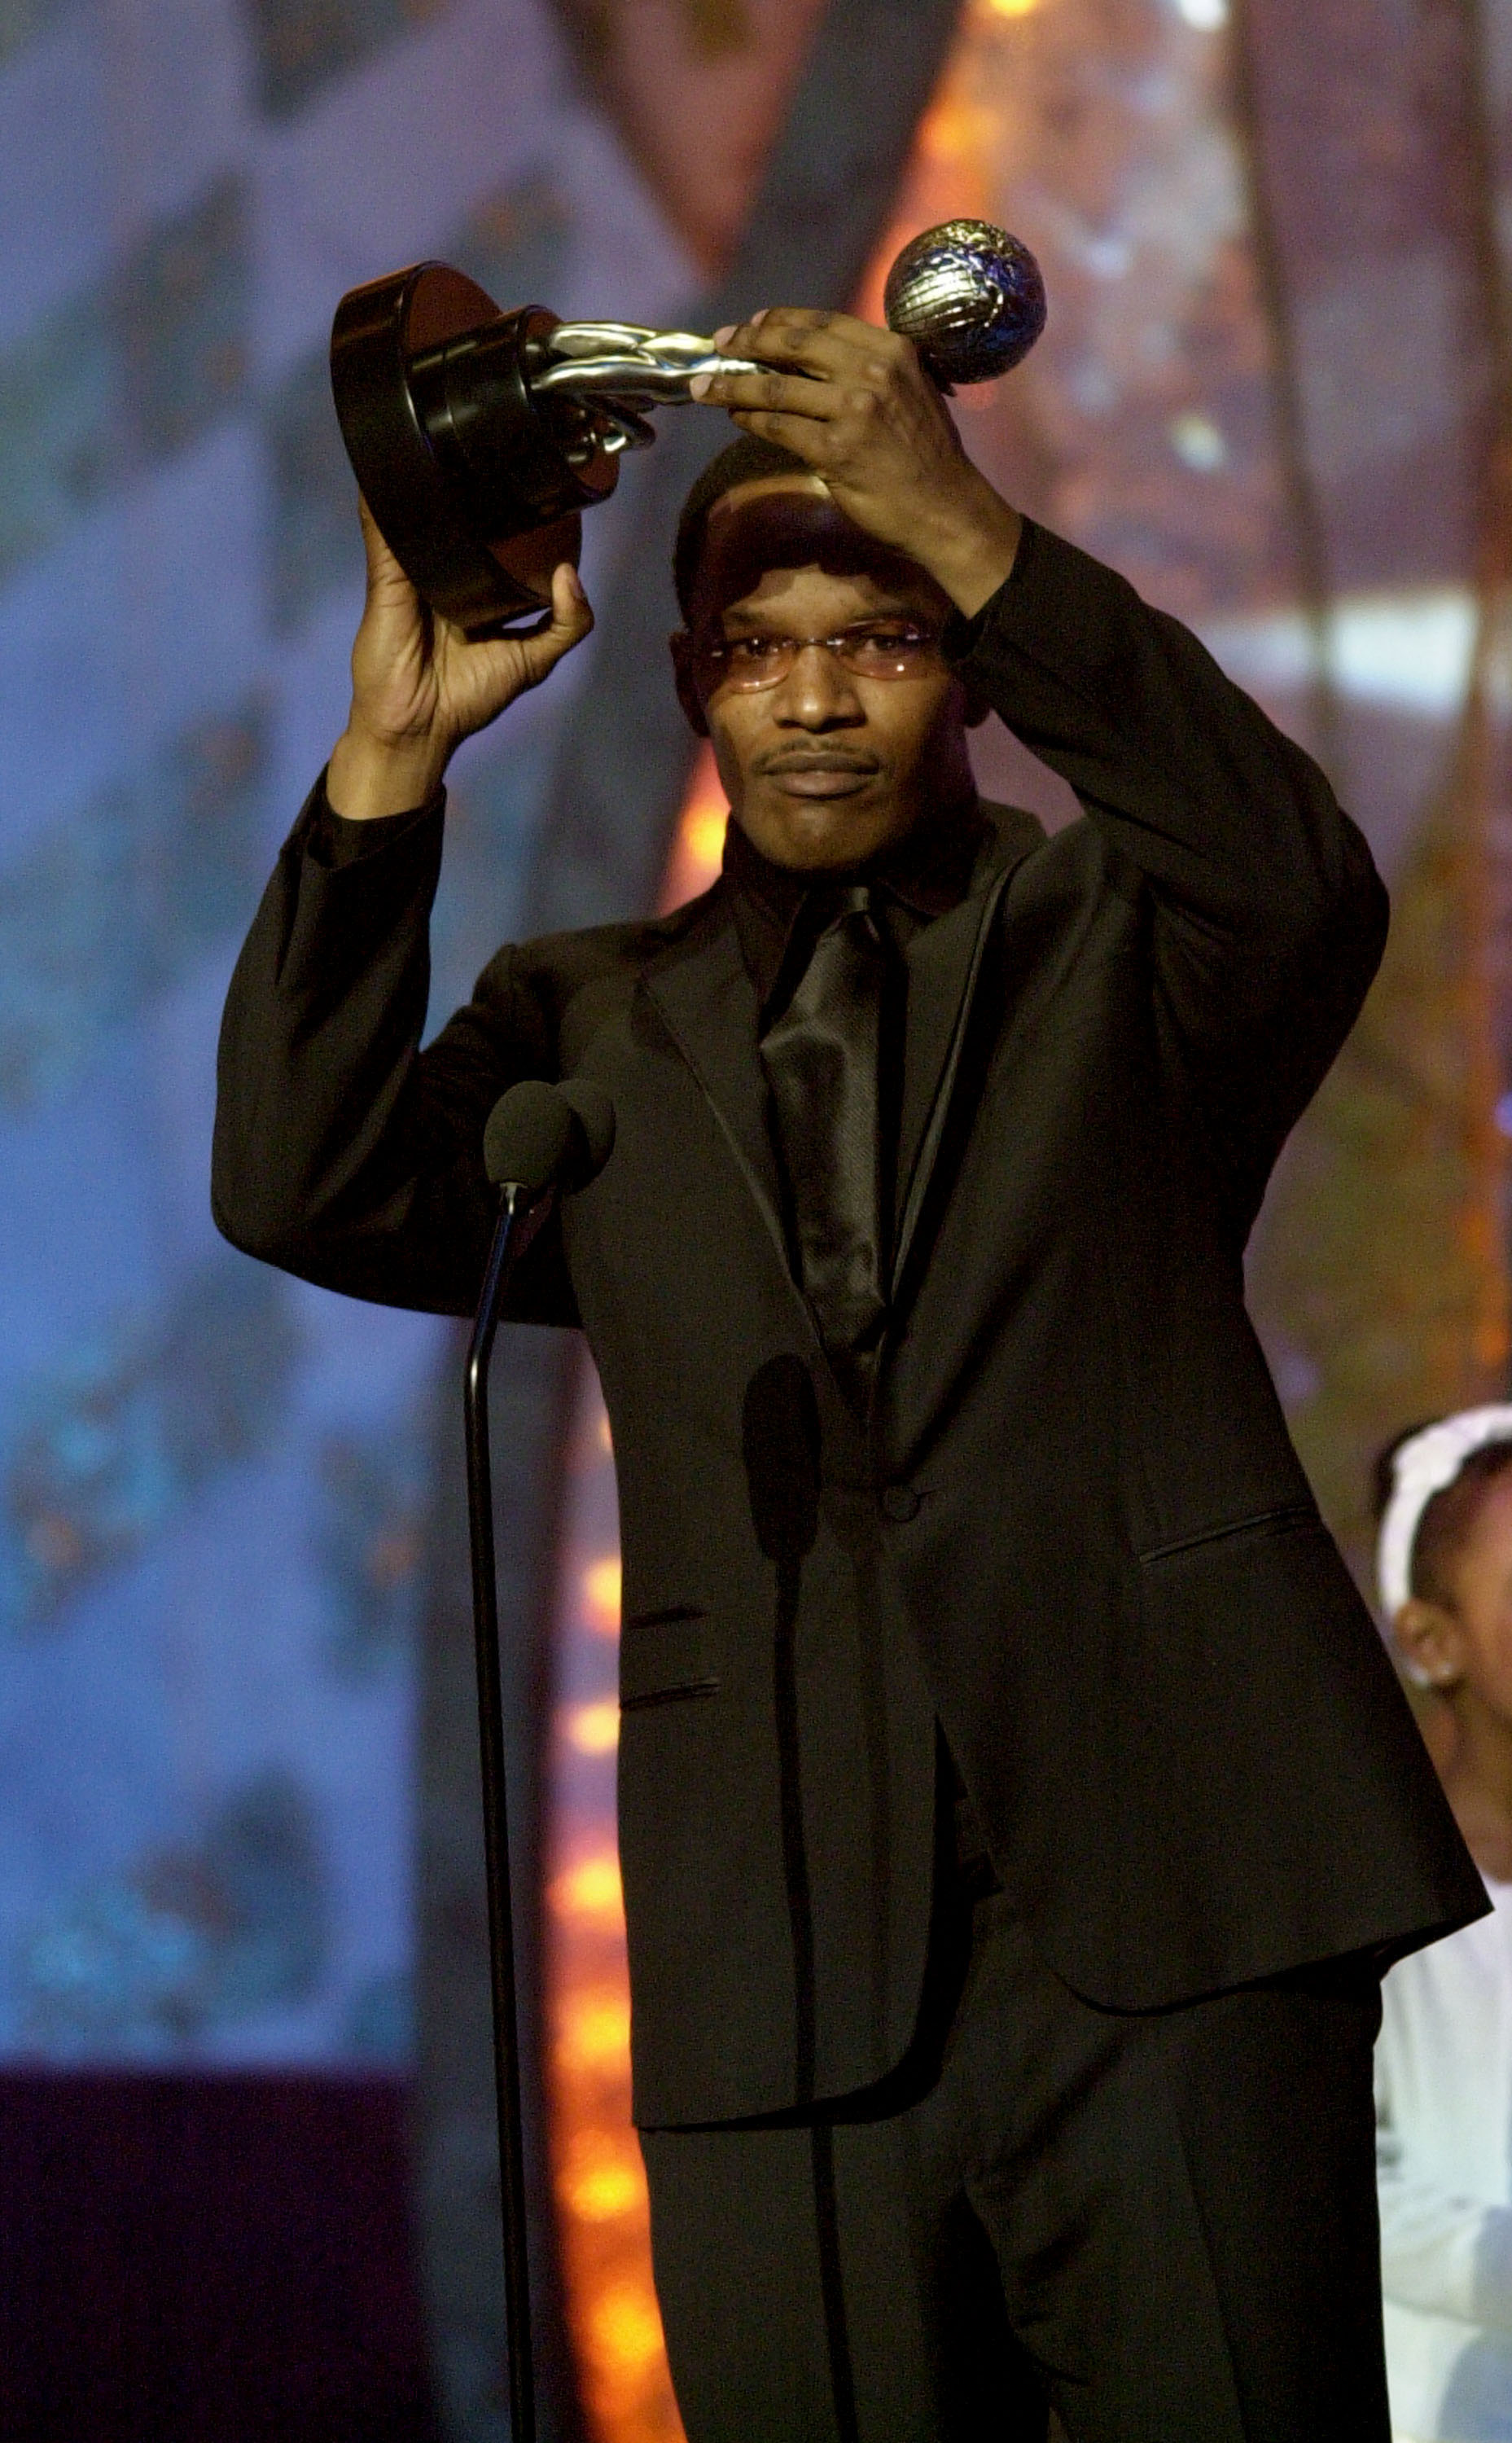 Jamie Foxx accepting the award for Outstanding Supporting Actor in a Motion Picture at the 33rd NAACP Image Awards on February 23, 2002, in Universal City, California. | Source: Getty Images